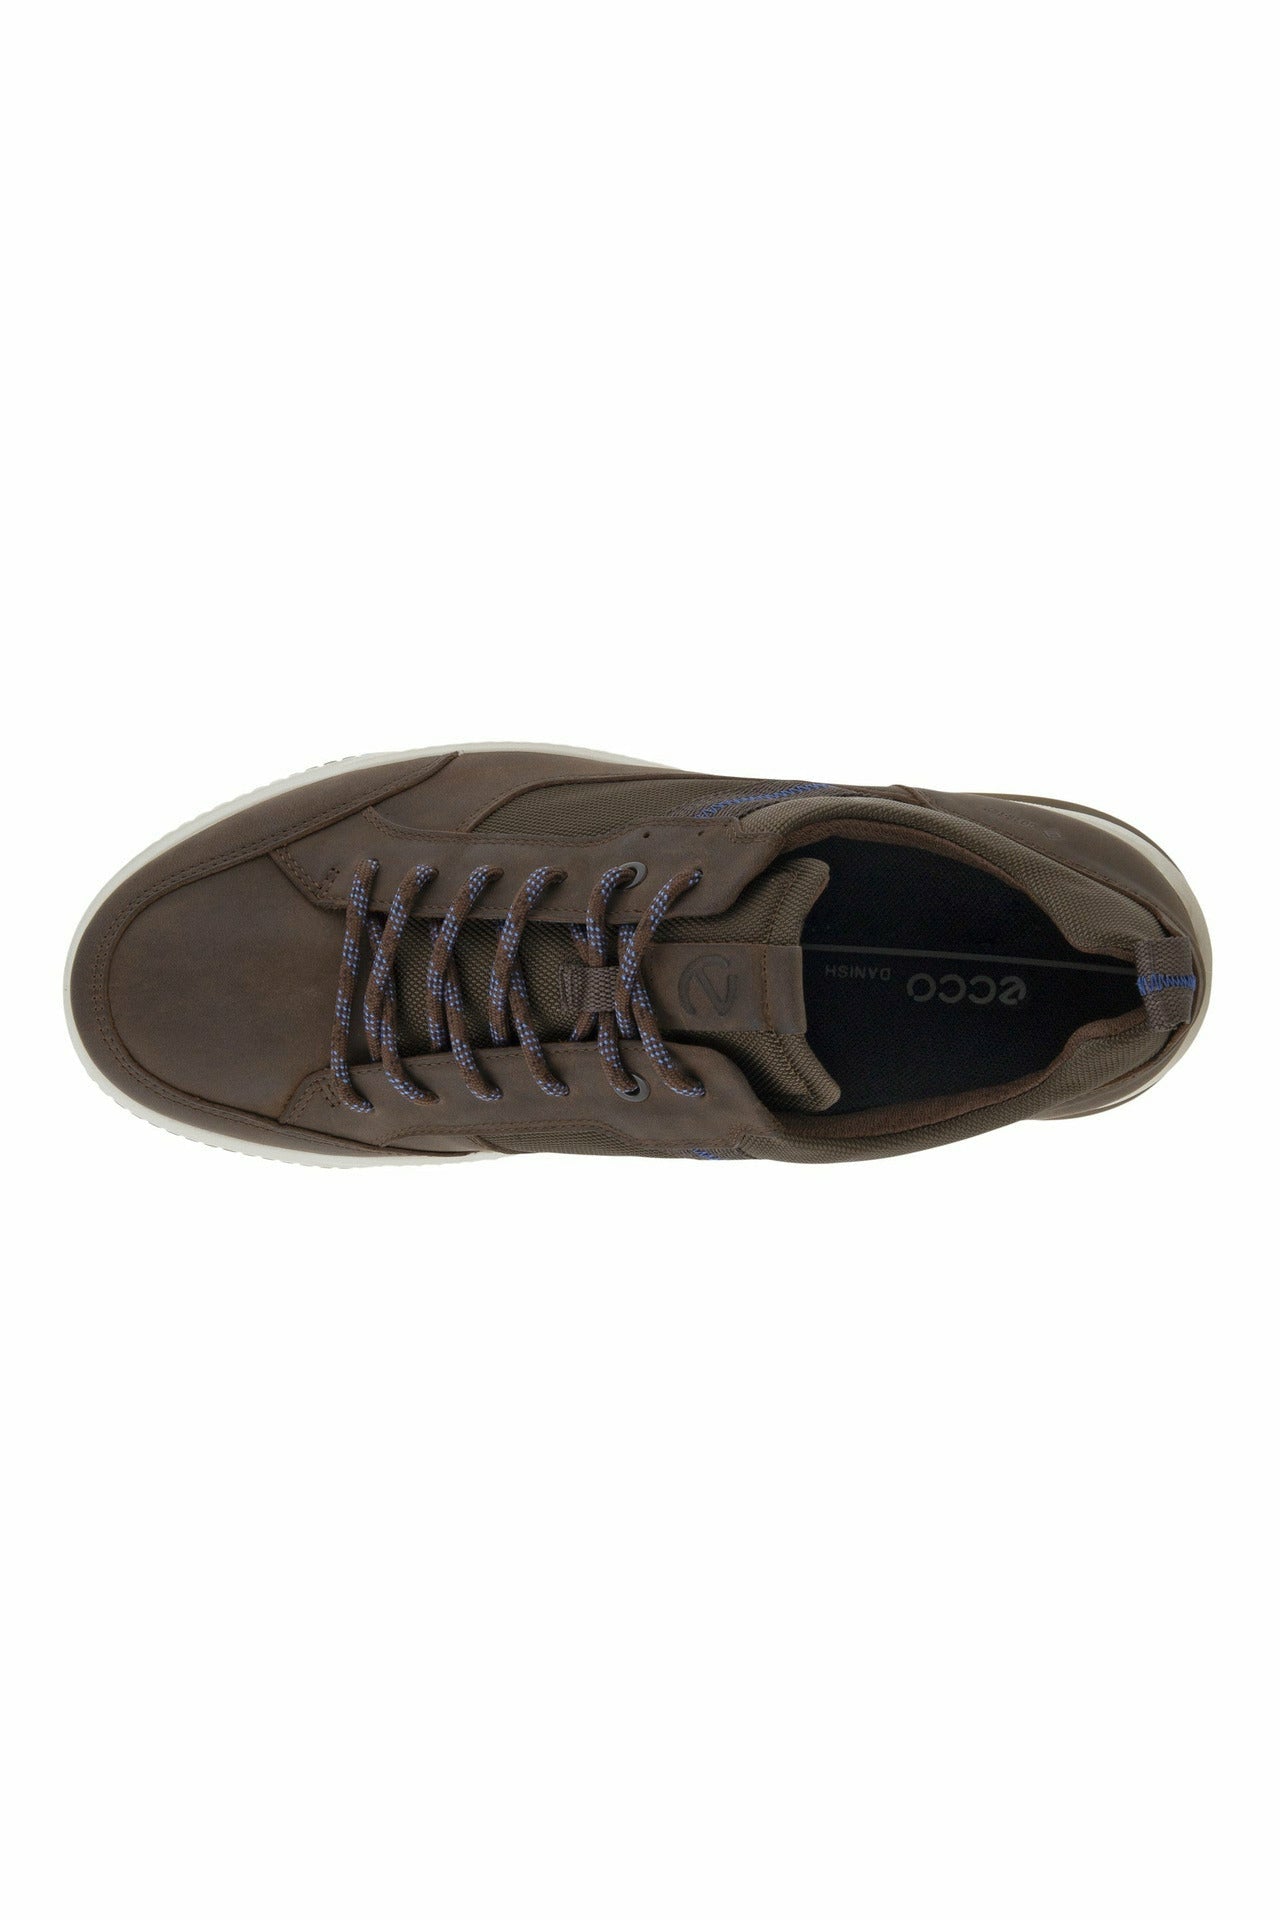 ECCO Byway Tred Gortex 501874 60511 in cocoa brown